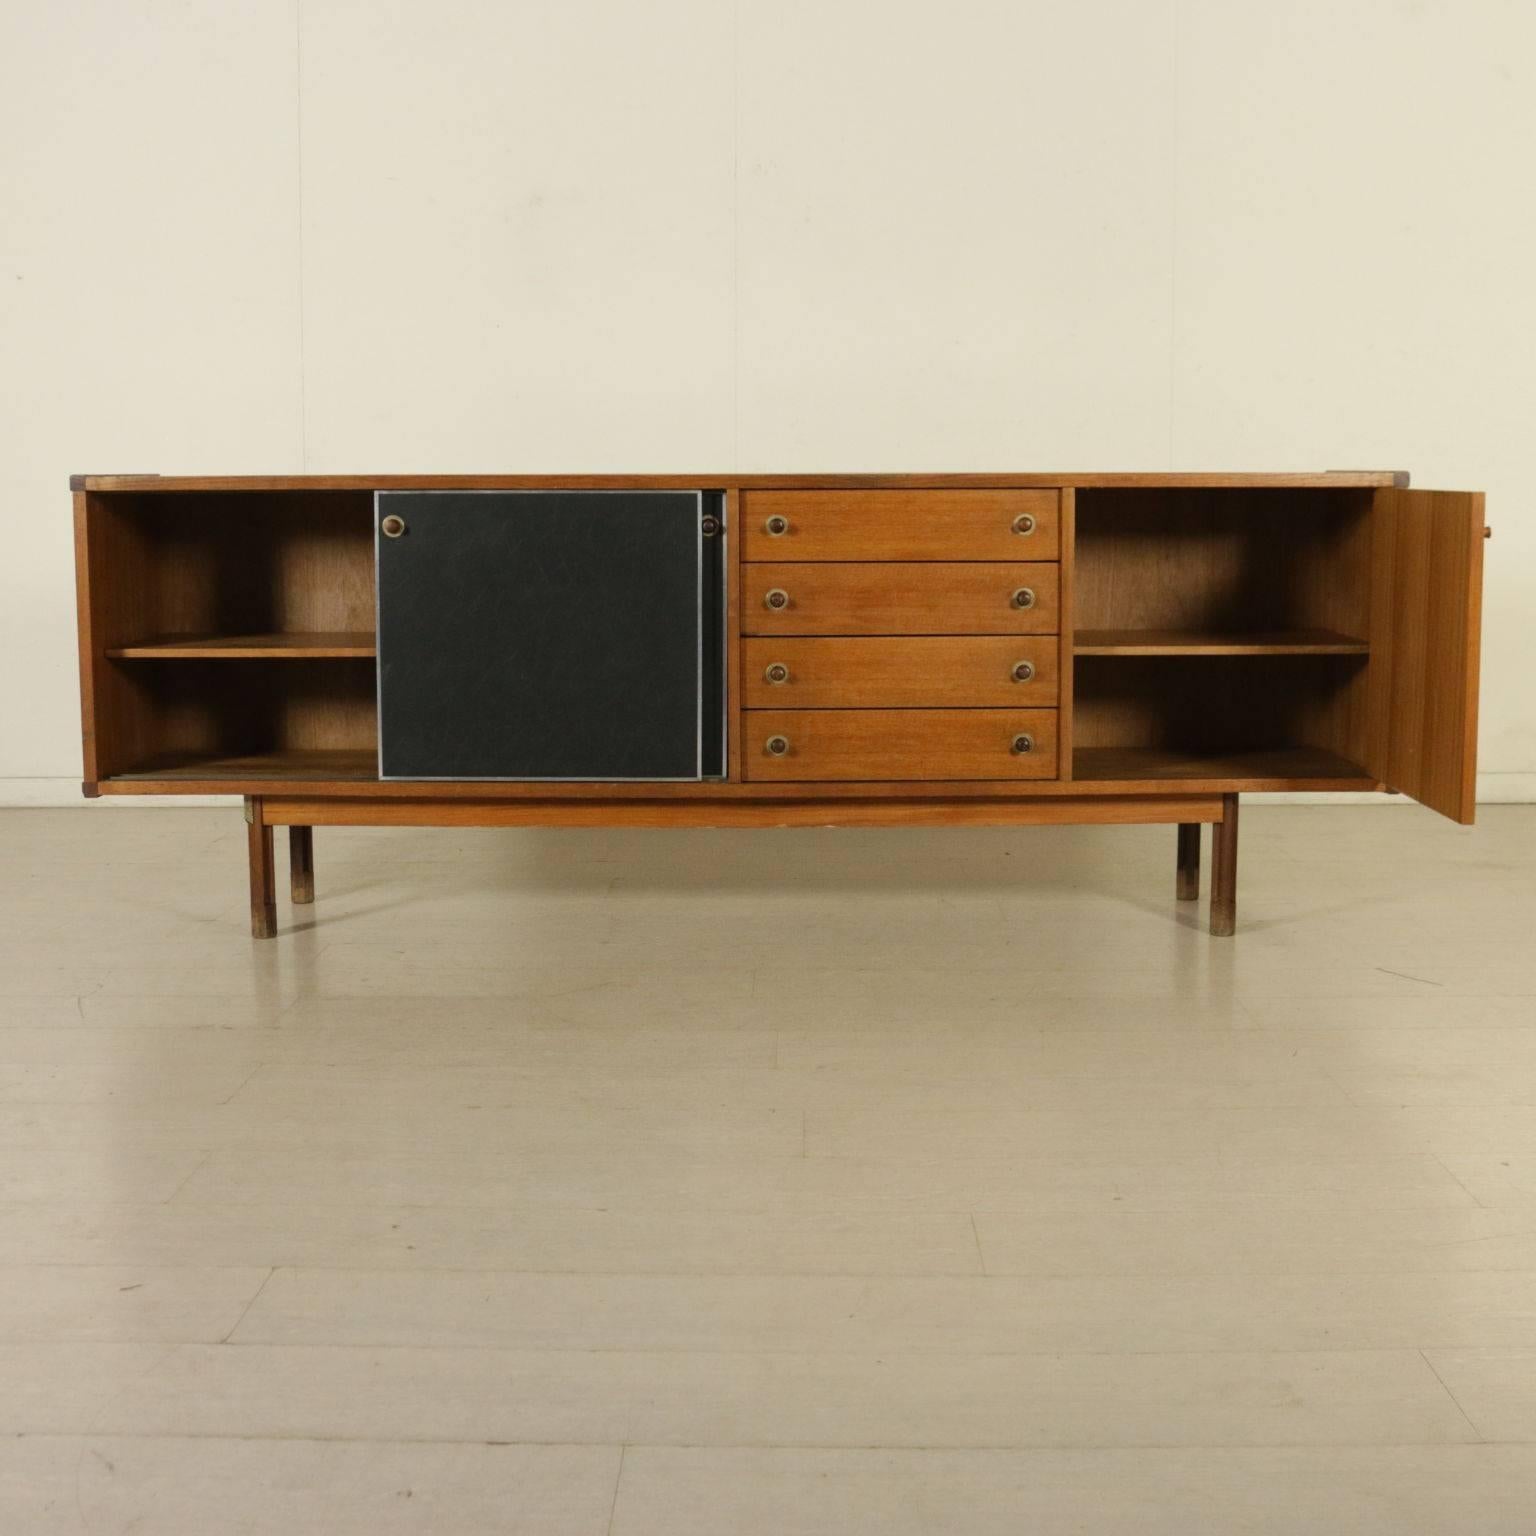 A sideboard with sliding doors and drawers. Teak veneer, leatherette, aluminium, brass. Manufactured in Italy, 1960s.